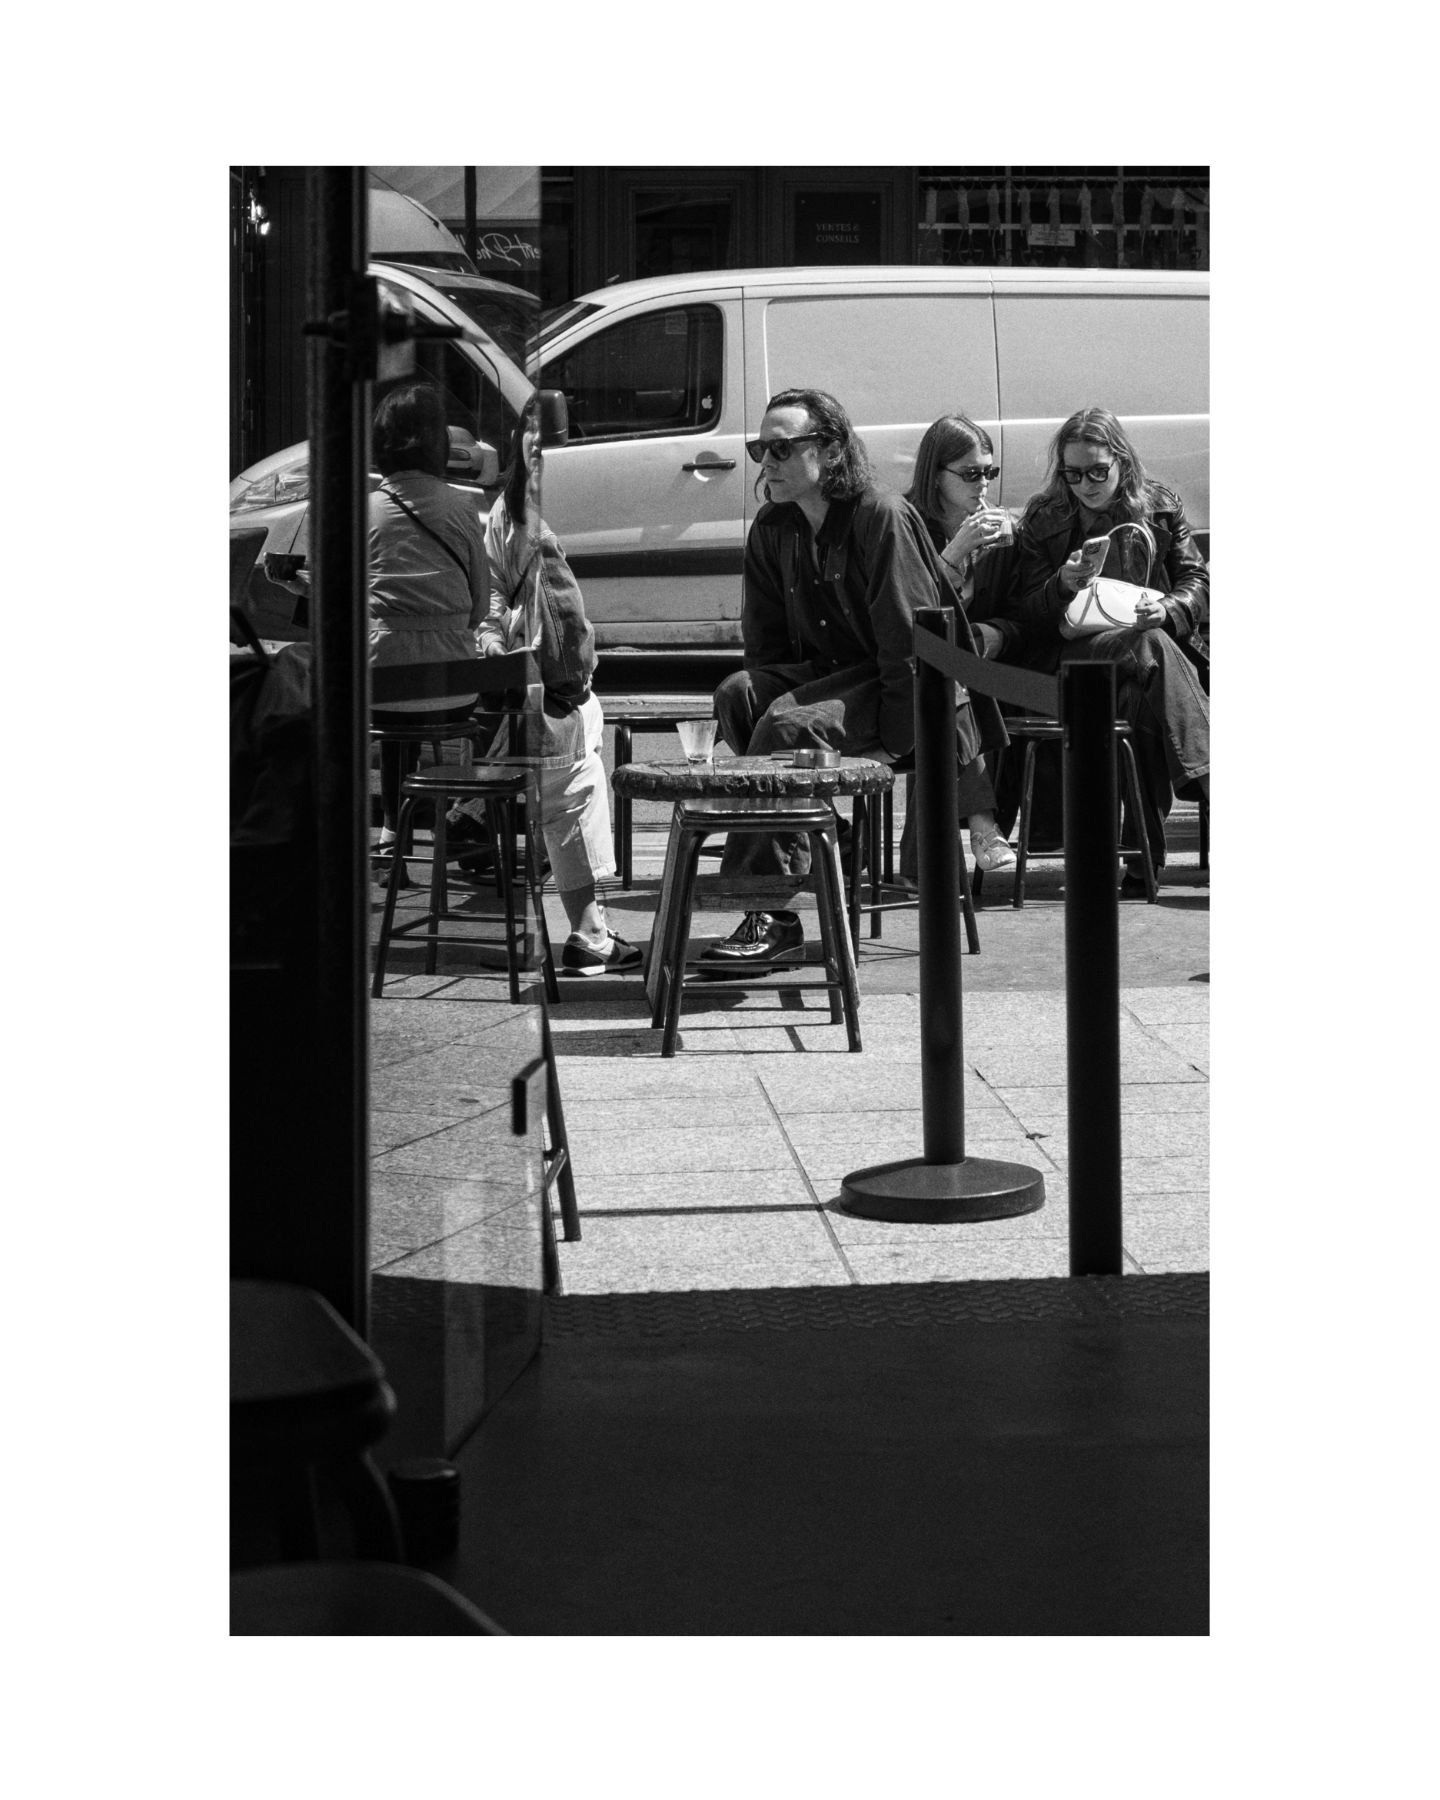 Chillin' ☕️ #Paris @motorscoffee #people #chilling #coffee #time #GRist #shootGR #grsnaps #bw #photography